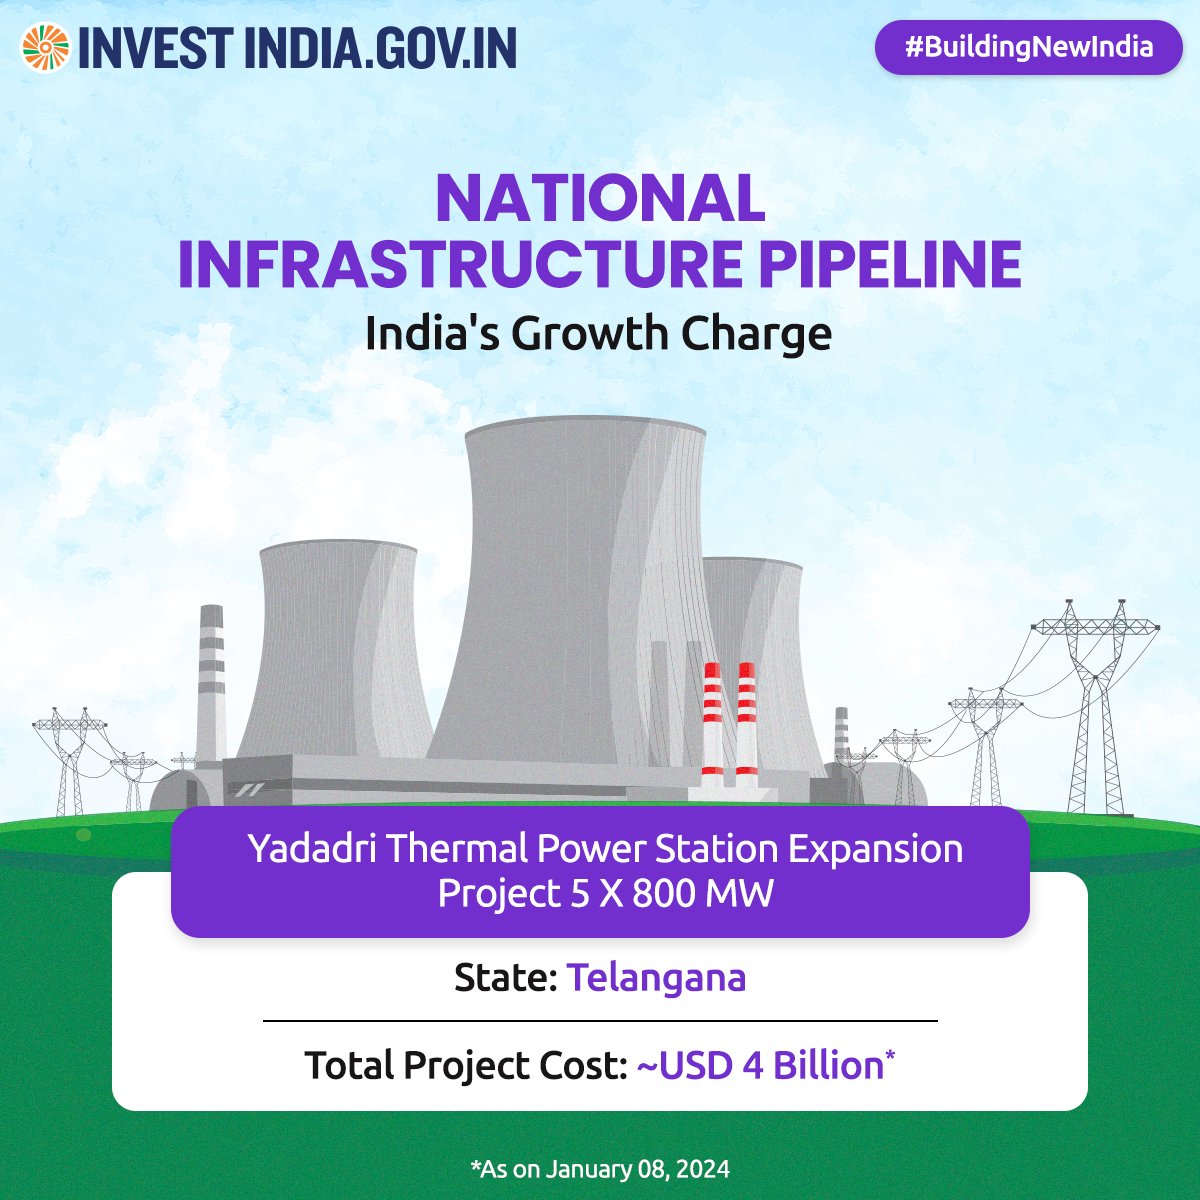 Under #NIP, the Yadadri Thermal Power Station Expansion Project [5 X 800 MW], once completed, will cater to the energy needs of #Telangana.

Know more: bit.ly/page_NIP

#BuildingNewIndia #NationalInfrastructurePipeline #InvestInTelangana #ThermalPower @revanth_anumula